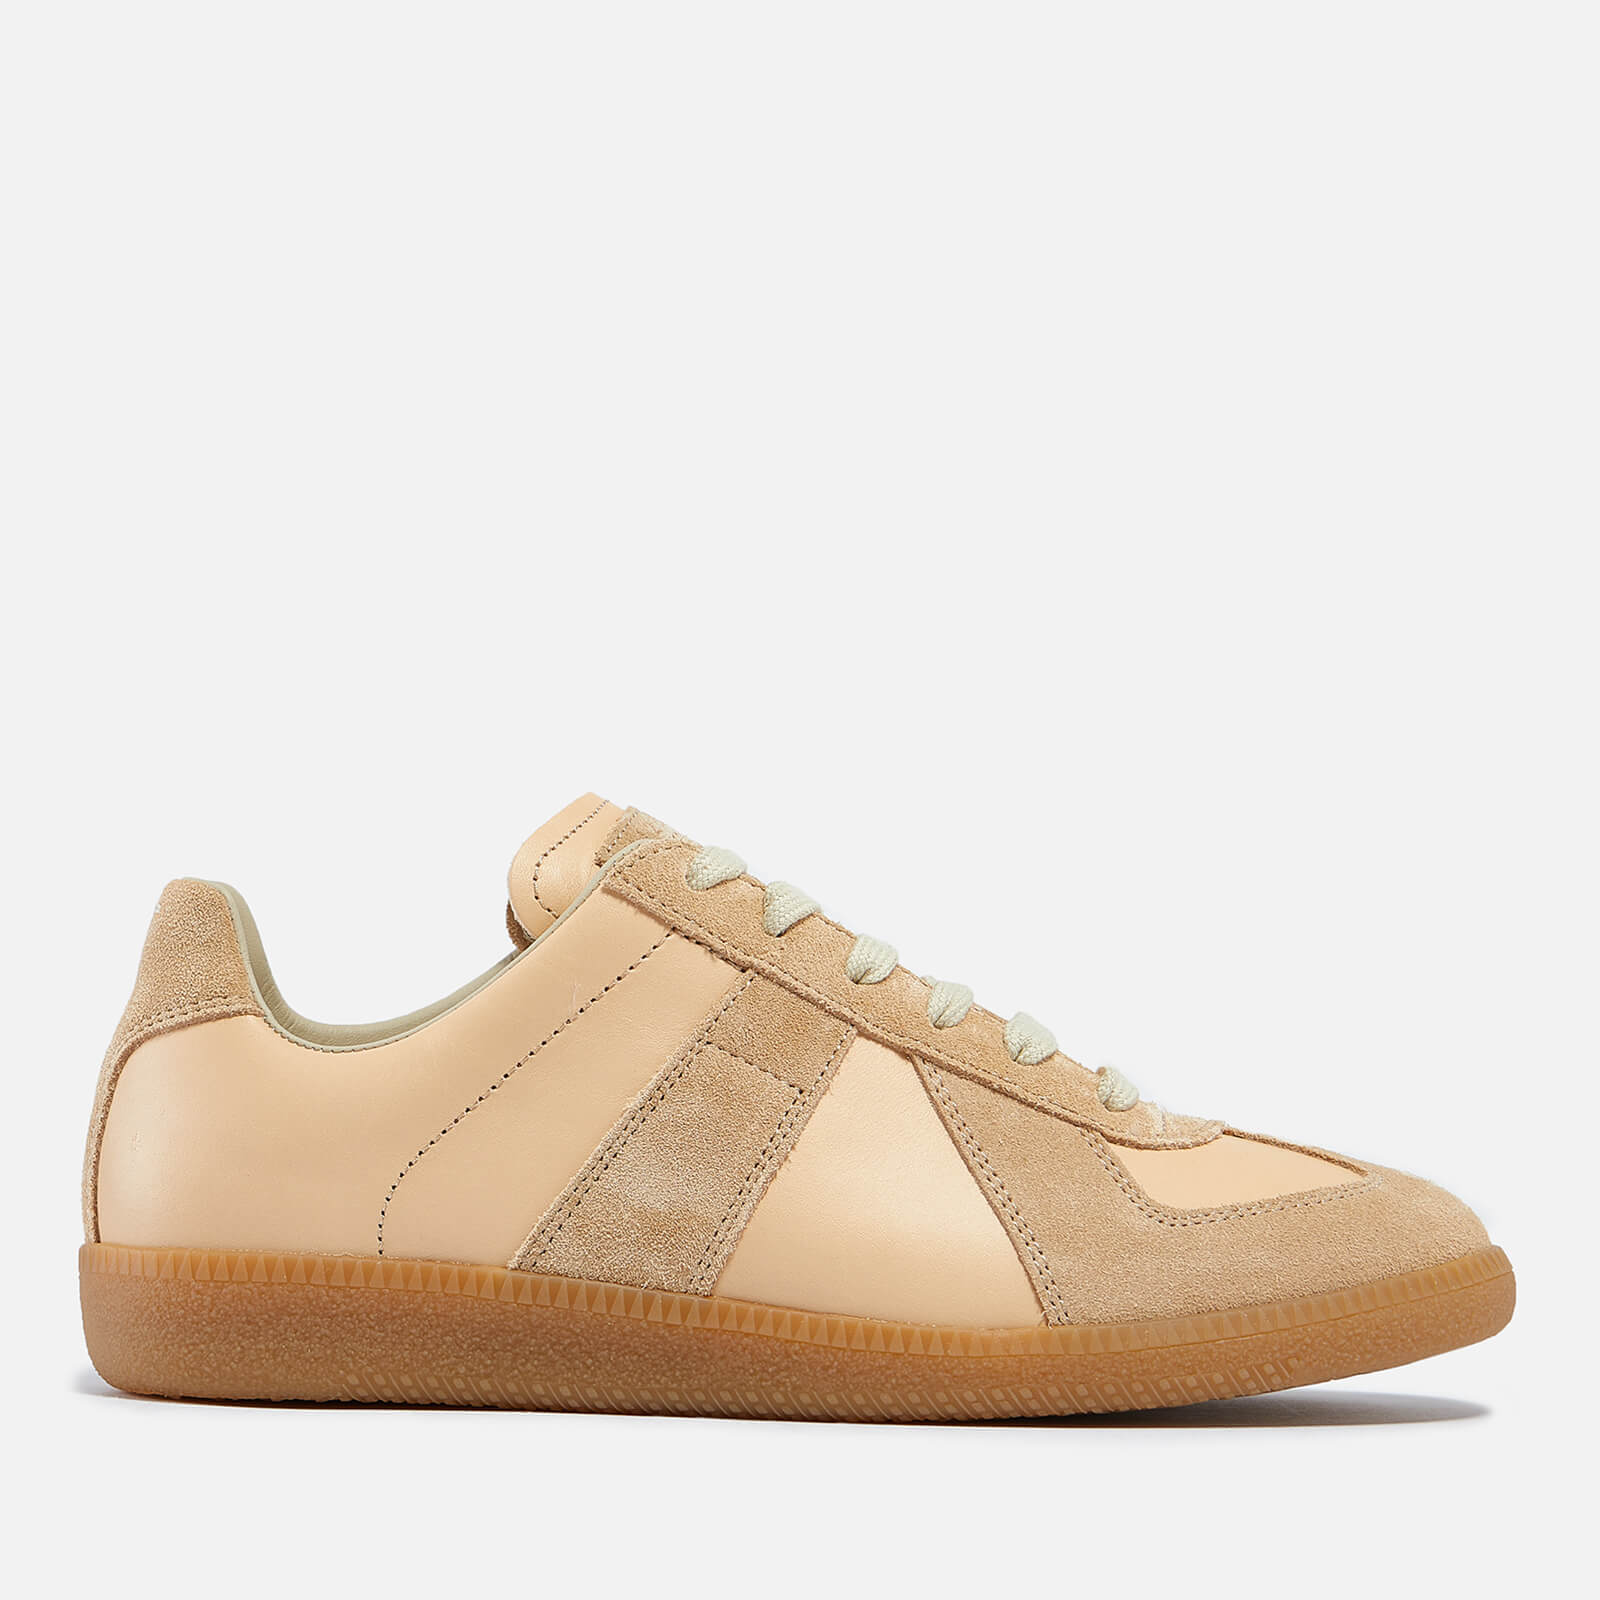 Maison Margiela Replica Suede and Leather Trainers - UK 3